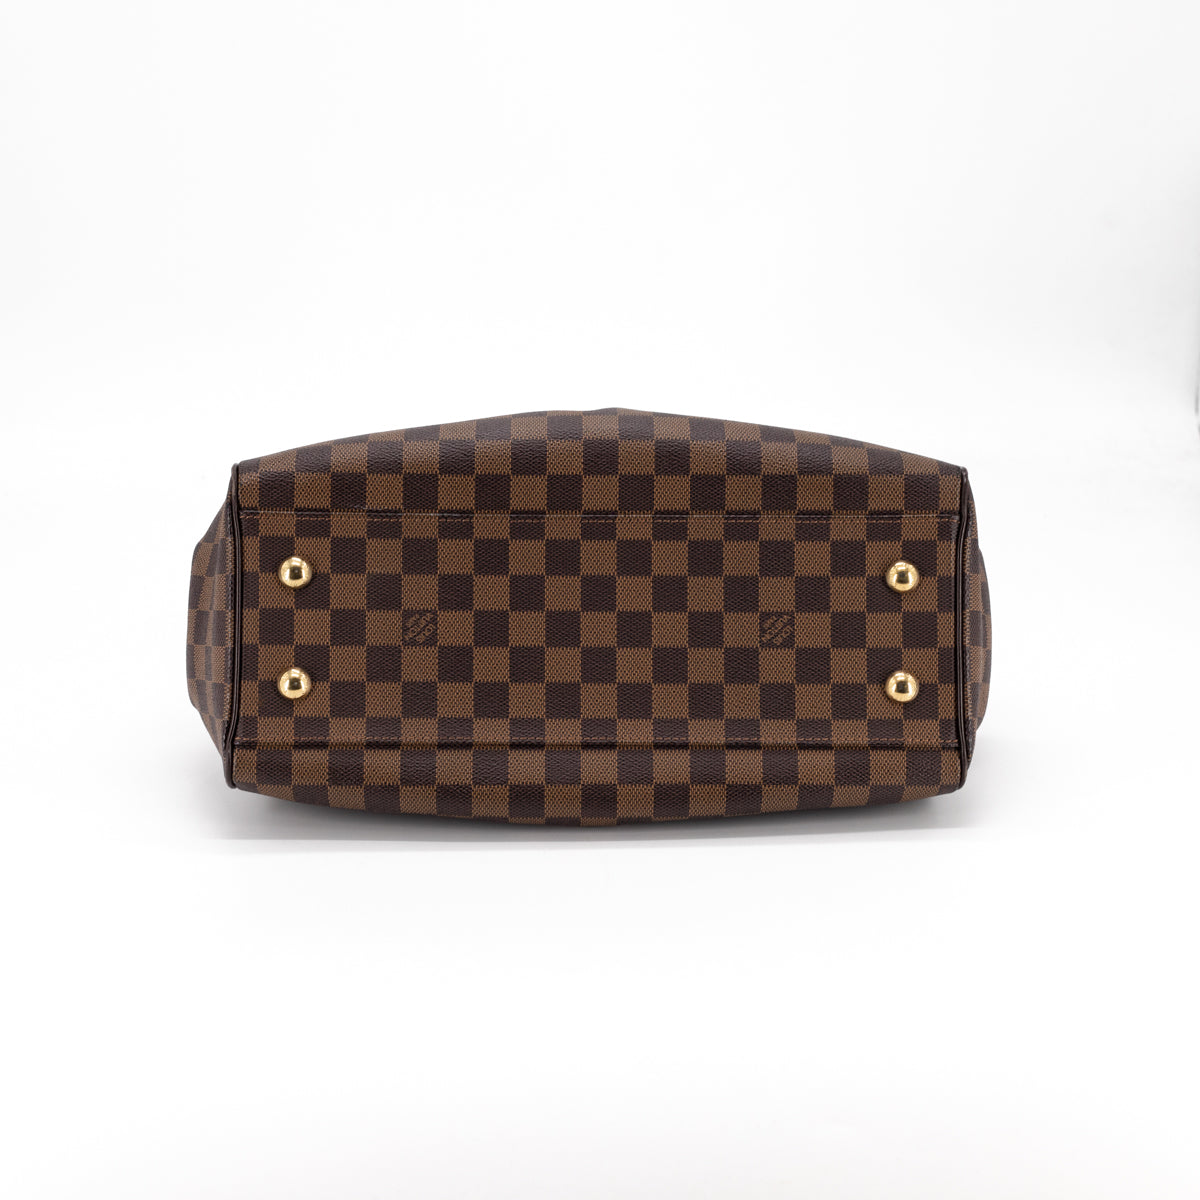 Authentic Louis Vuitton “duomo” in damier ebene! immaculate shape